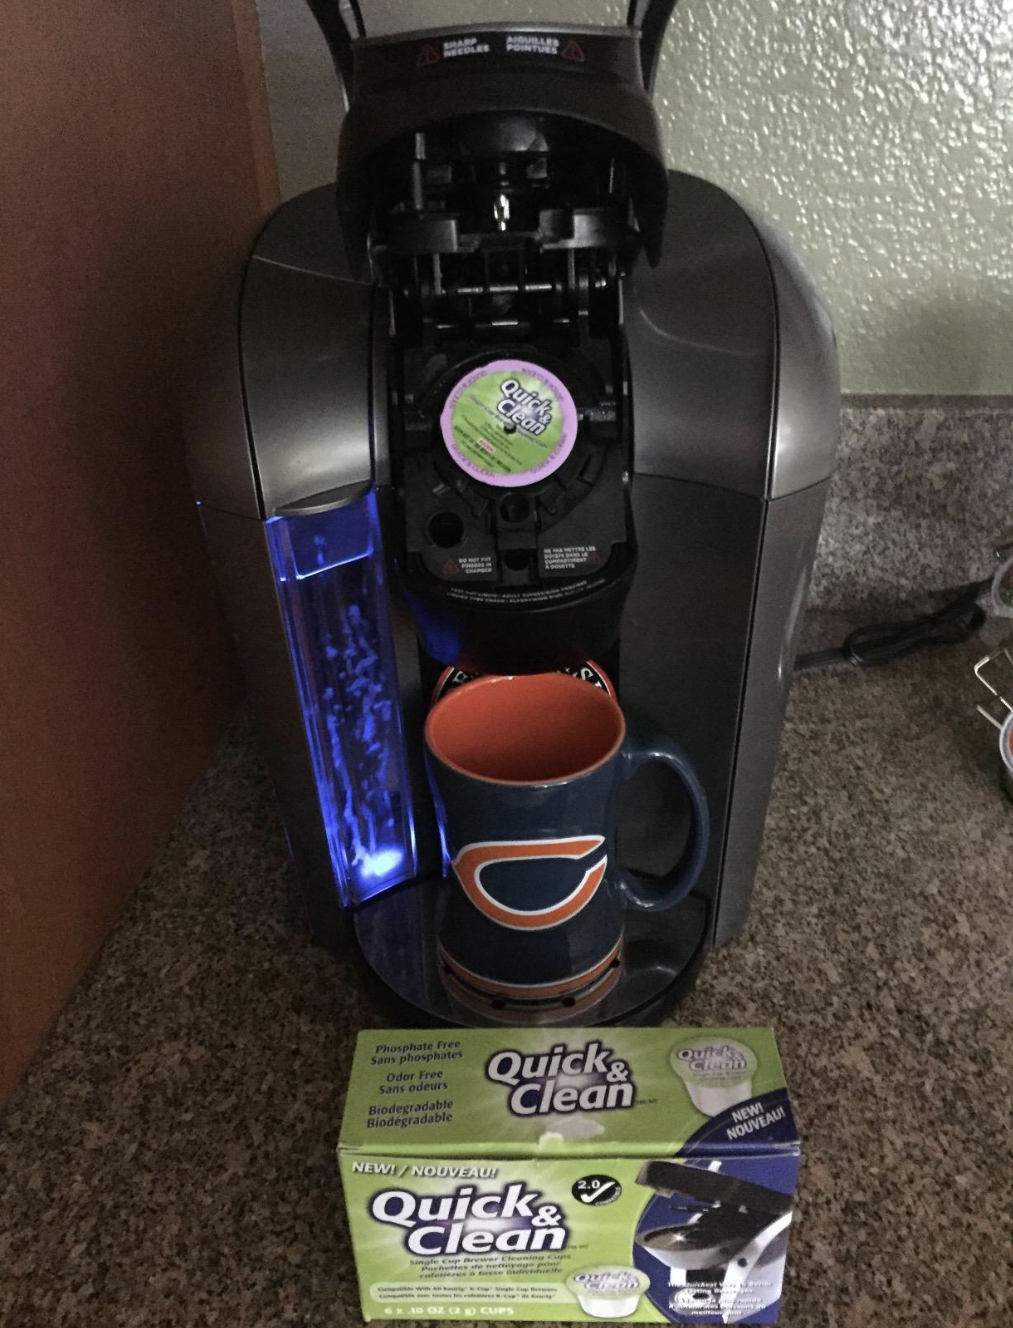 Reviewer image of the cleaning K-cup in a Keurig machine